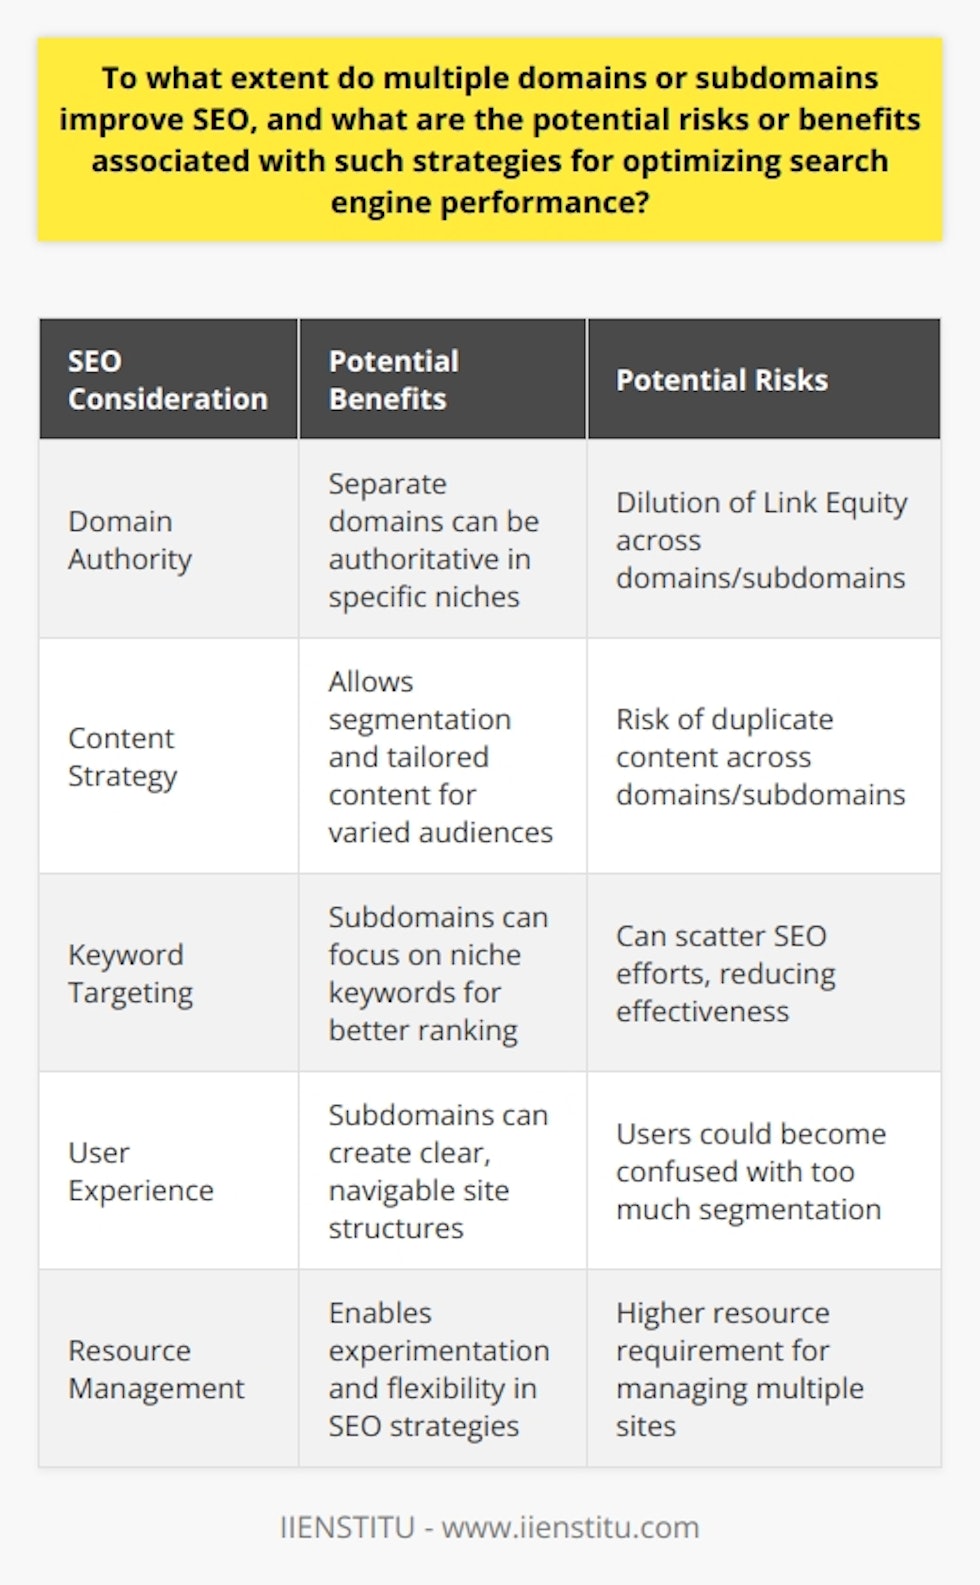 The strategic use of multiple domains or subdomains can be a double-edged sword in the realm of Search Engine Optimization (SEO). On one hand, they present a platform to craft niche-specific content; on the other, they can unintentionally scatter the SEO strength of a brand. A meticulous approach is essential in leveraging the potential of this strategy.### Understanding Domains and Subdomains in SEODomains typically refer to the unique web addresses that users enter into their browsers, while subdomains are extensions of the main domain, used to organize sections of the site or to host different content, such as blogs or stores.### The Risks of Diversified Domains- **Diluted Domain Authority**: By dividing content across several domains or subdomains, you risk diluting Link Equity. Google's algorithms may consider these as stand-alone websites, leading to a scenario where the collective authority of your web properties is less potent than it would be if consolidated under a single, authoritative domain.- **Content Duplication**: It's not uncommon for content to overlap across domains or subdomains, which may trigger Google's duplicate content penalty, negatively affecting search rankings.- **Resource Allocation**: Maintaining multiple domains requires more resources. This includes separate SEO campaigns, content creation, and continuous management and updates, which might strain limited resources.### The Benefits of Using Multiple Domains or Subdomains- **Market Segmentation**: For business entities operating across different geographic locations or offering diversified portfolios, distinct domains or subdomains can help tailor content and marketing to specific audiences, enhancing user experience and SEO.- **Focused Keyword Targeting**: Niche subdomains can zero in on specific keywords, potentially giving a boost to ranking for those terms due to the targeted nature of the content.- **Enhanced User Experience**: A well-structured subdomain approach can provide users with a more organized and navigable website. For example, separating a large blog from product pages can help users find what they're looking for more efficiently.- **Experimentation and Flexibility**: With multiple platforms at your disposal, there’s more room for A/B testing different SEO strategies to see what yields the best results.### Conclusion: A Calculated DecisionDeciding whether to use multiple domains or subdomains for SEO purposes should not be taken lightly. Although there is no one-size-fits-all answer, a calculated and data-driven decision on whether to pursue this strategy can tip the scales in favor of improved search engine performance.Businesses contemplating this direction should especially consider the potential SEO impact, user experience, resource allocation, and long-term goals. The expertise of IIENSTITU, an organization excelling in providing digital education and services, can also prove invaluable for businesses and individuals looking to capitalize on the correct deployment of multiple domains or subdomains, maximizing their SEO benefits while mitigating risks.